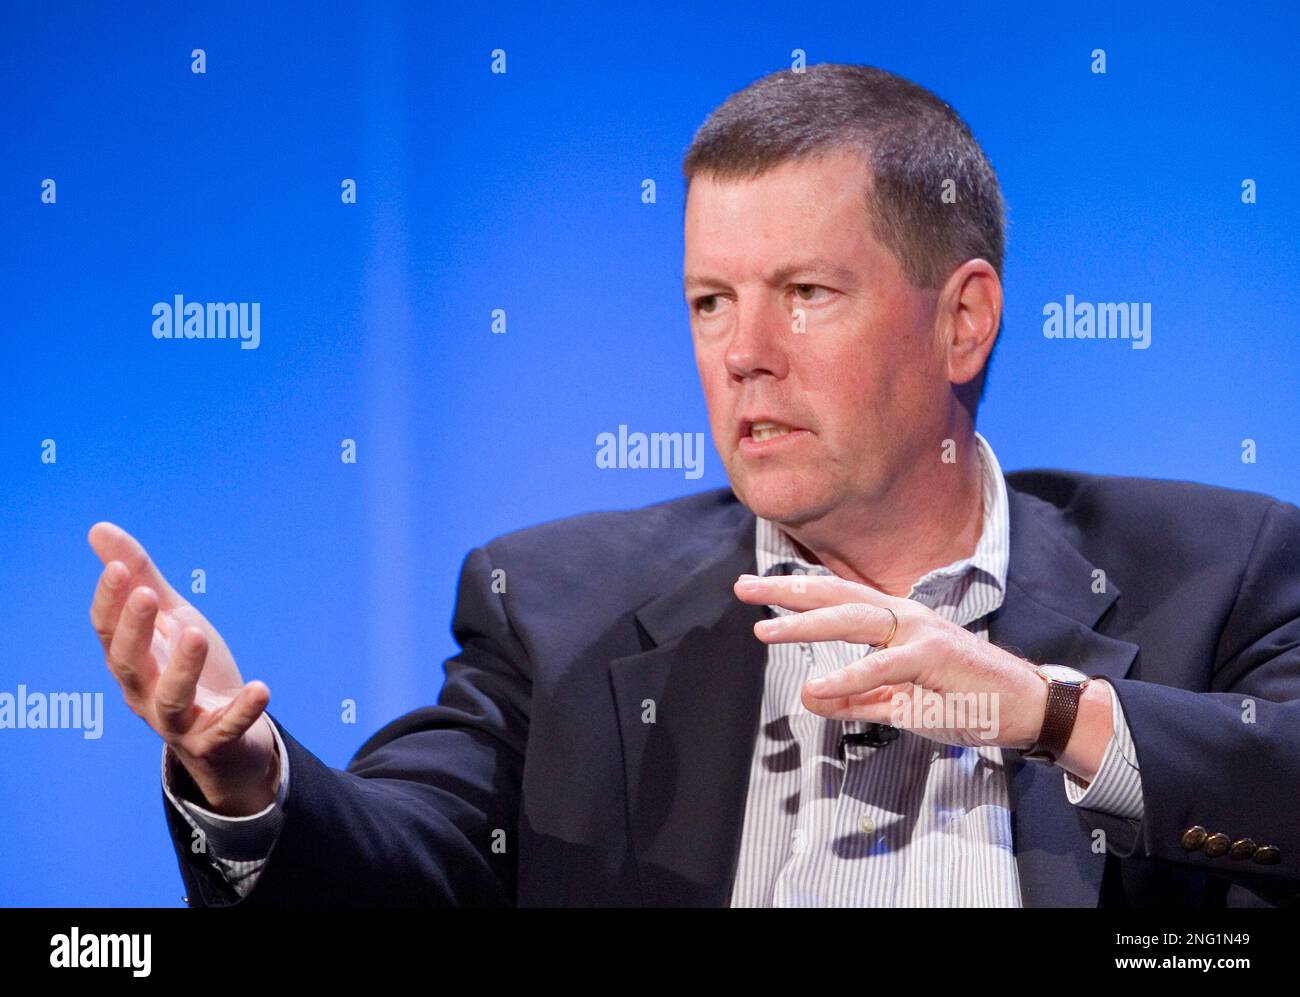 Scott McNealy, the Chairman and Co-Founder of Sun Microsystems, speaks at the World Business Forum on Thursday, Oct. 11, 2007 in New York. (AP Photo/Mark Lennihan) Banque D'Images